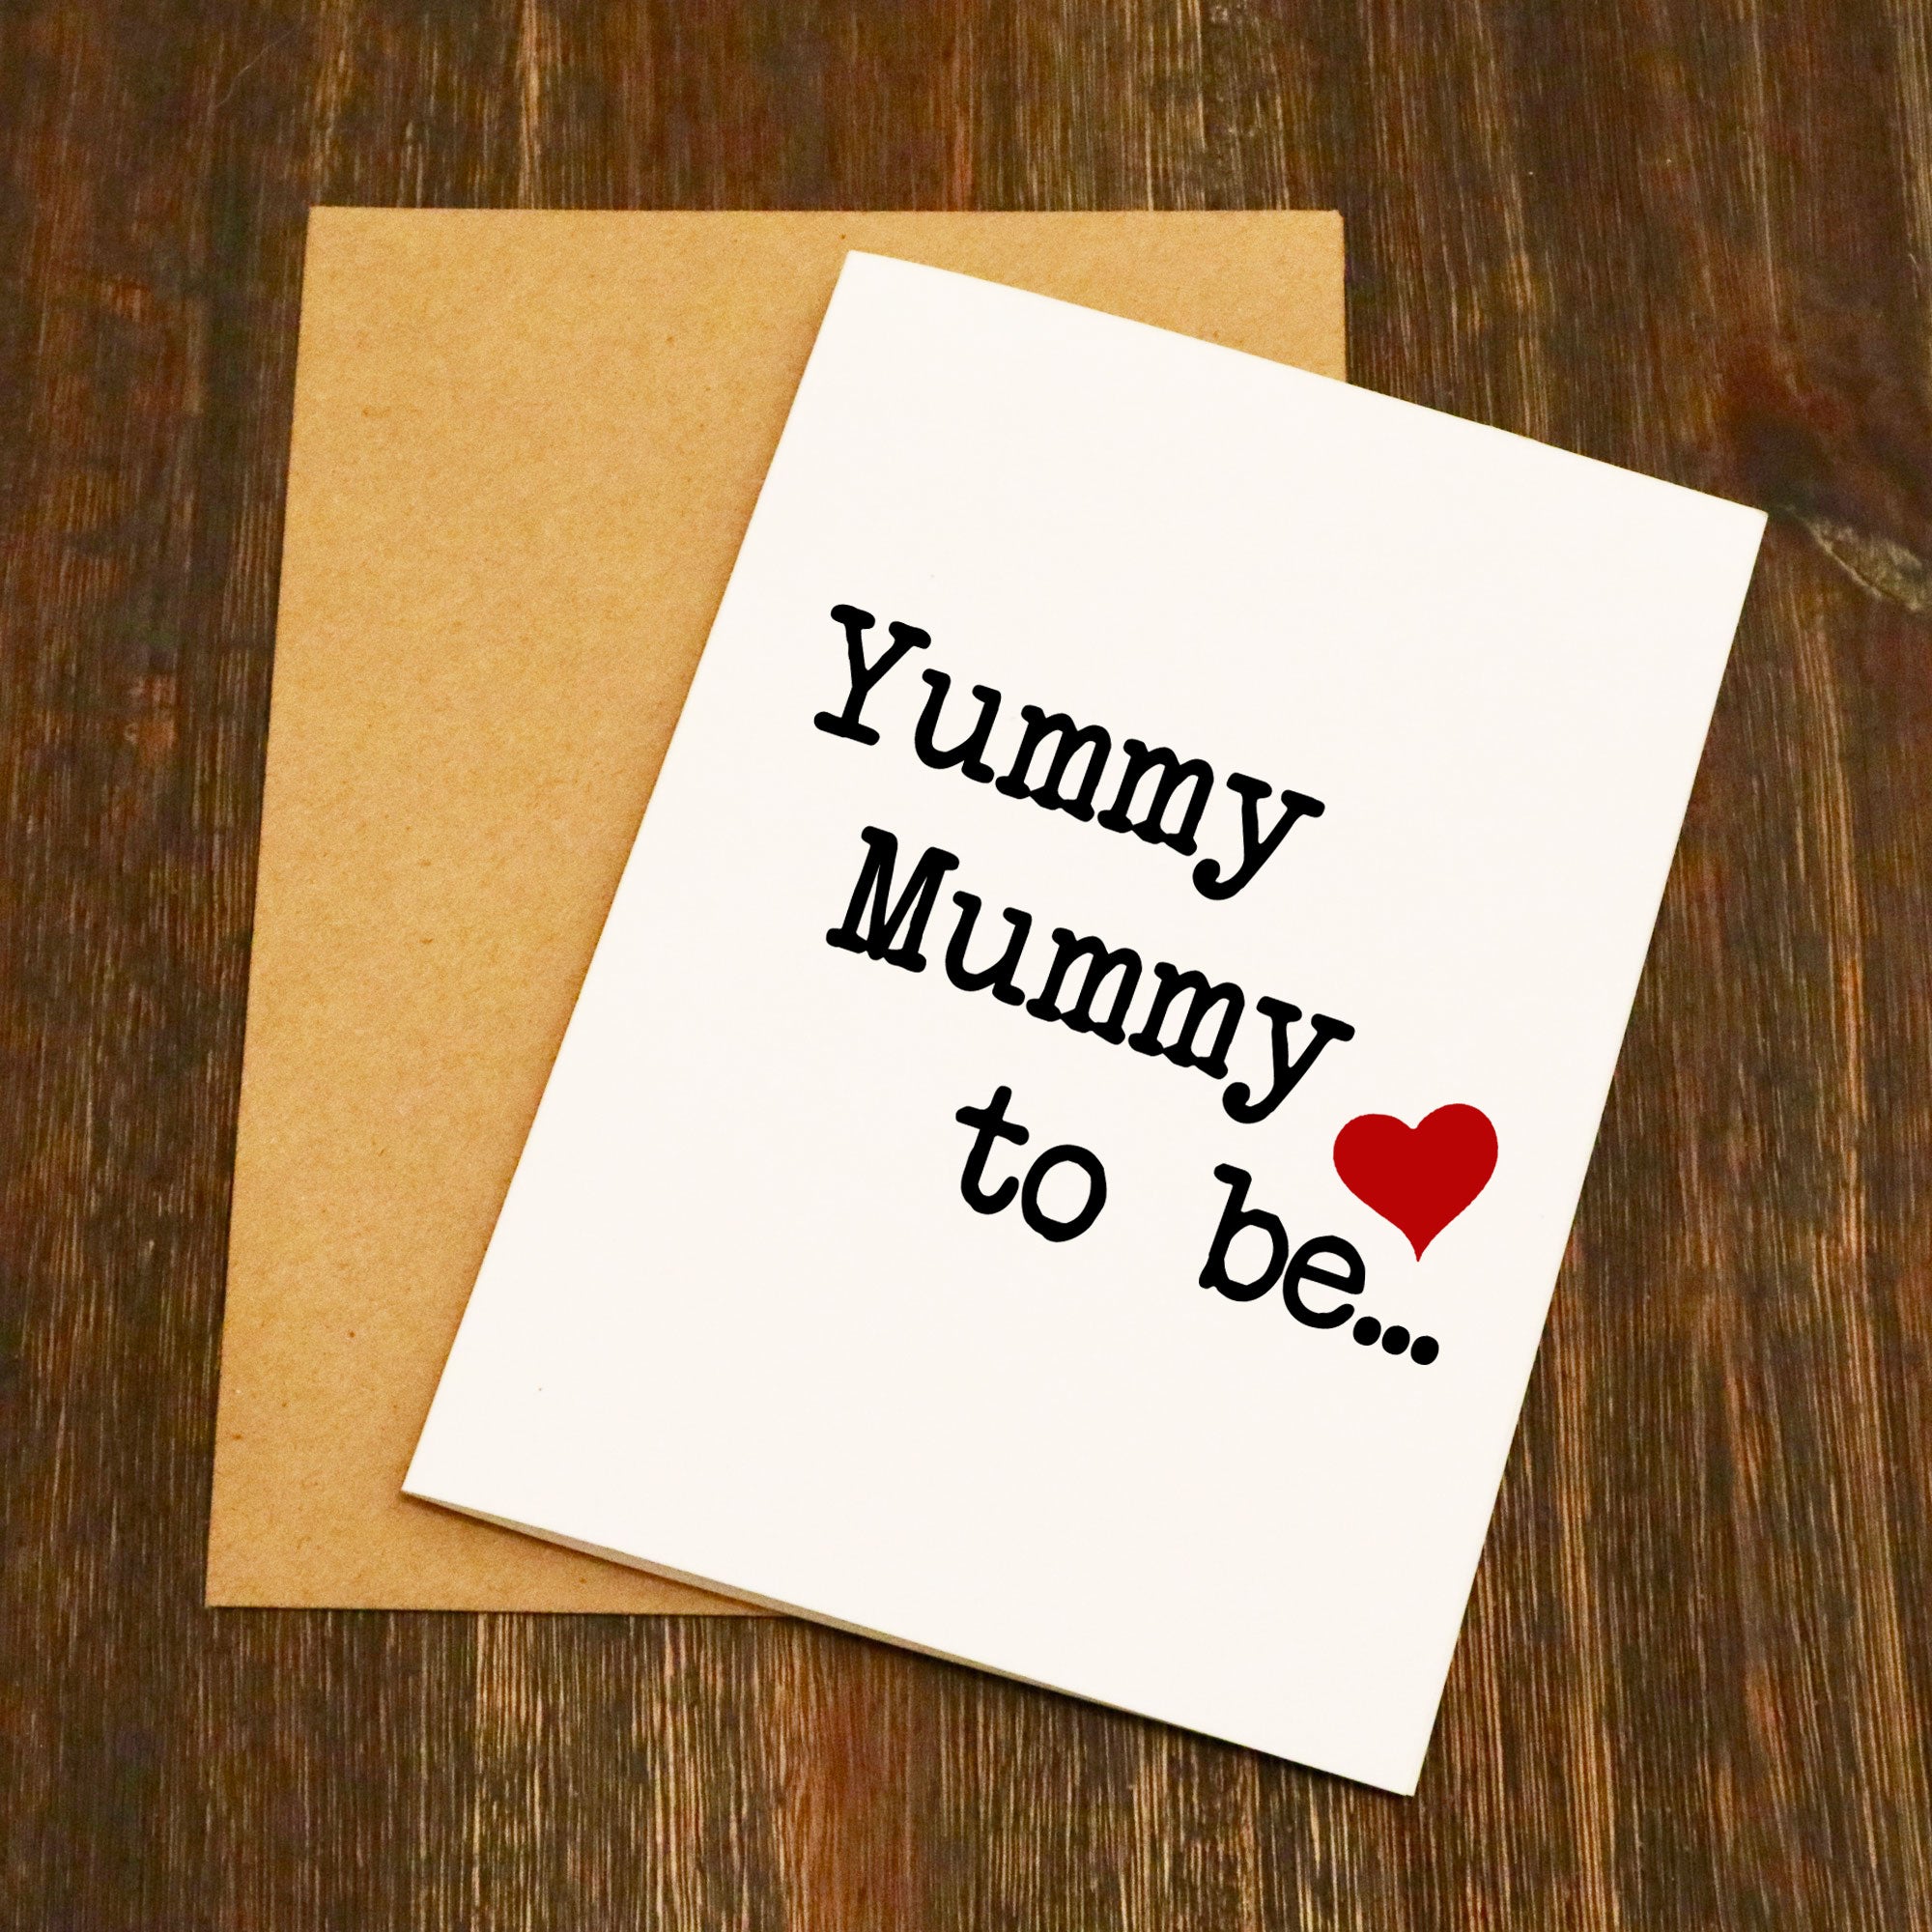 Yummy Mummy to be... Greetings Card